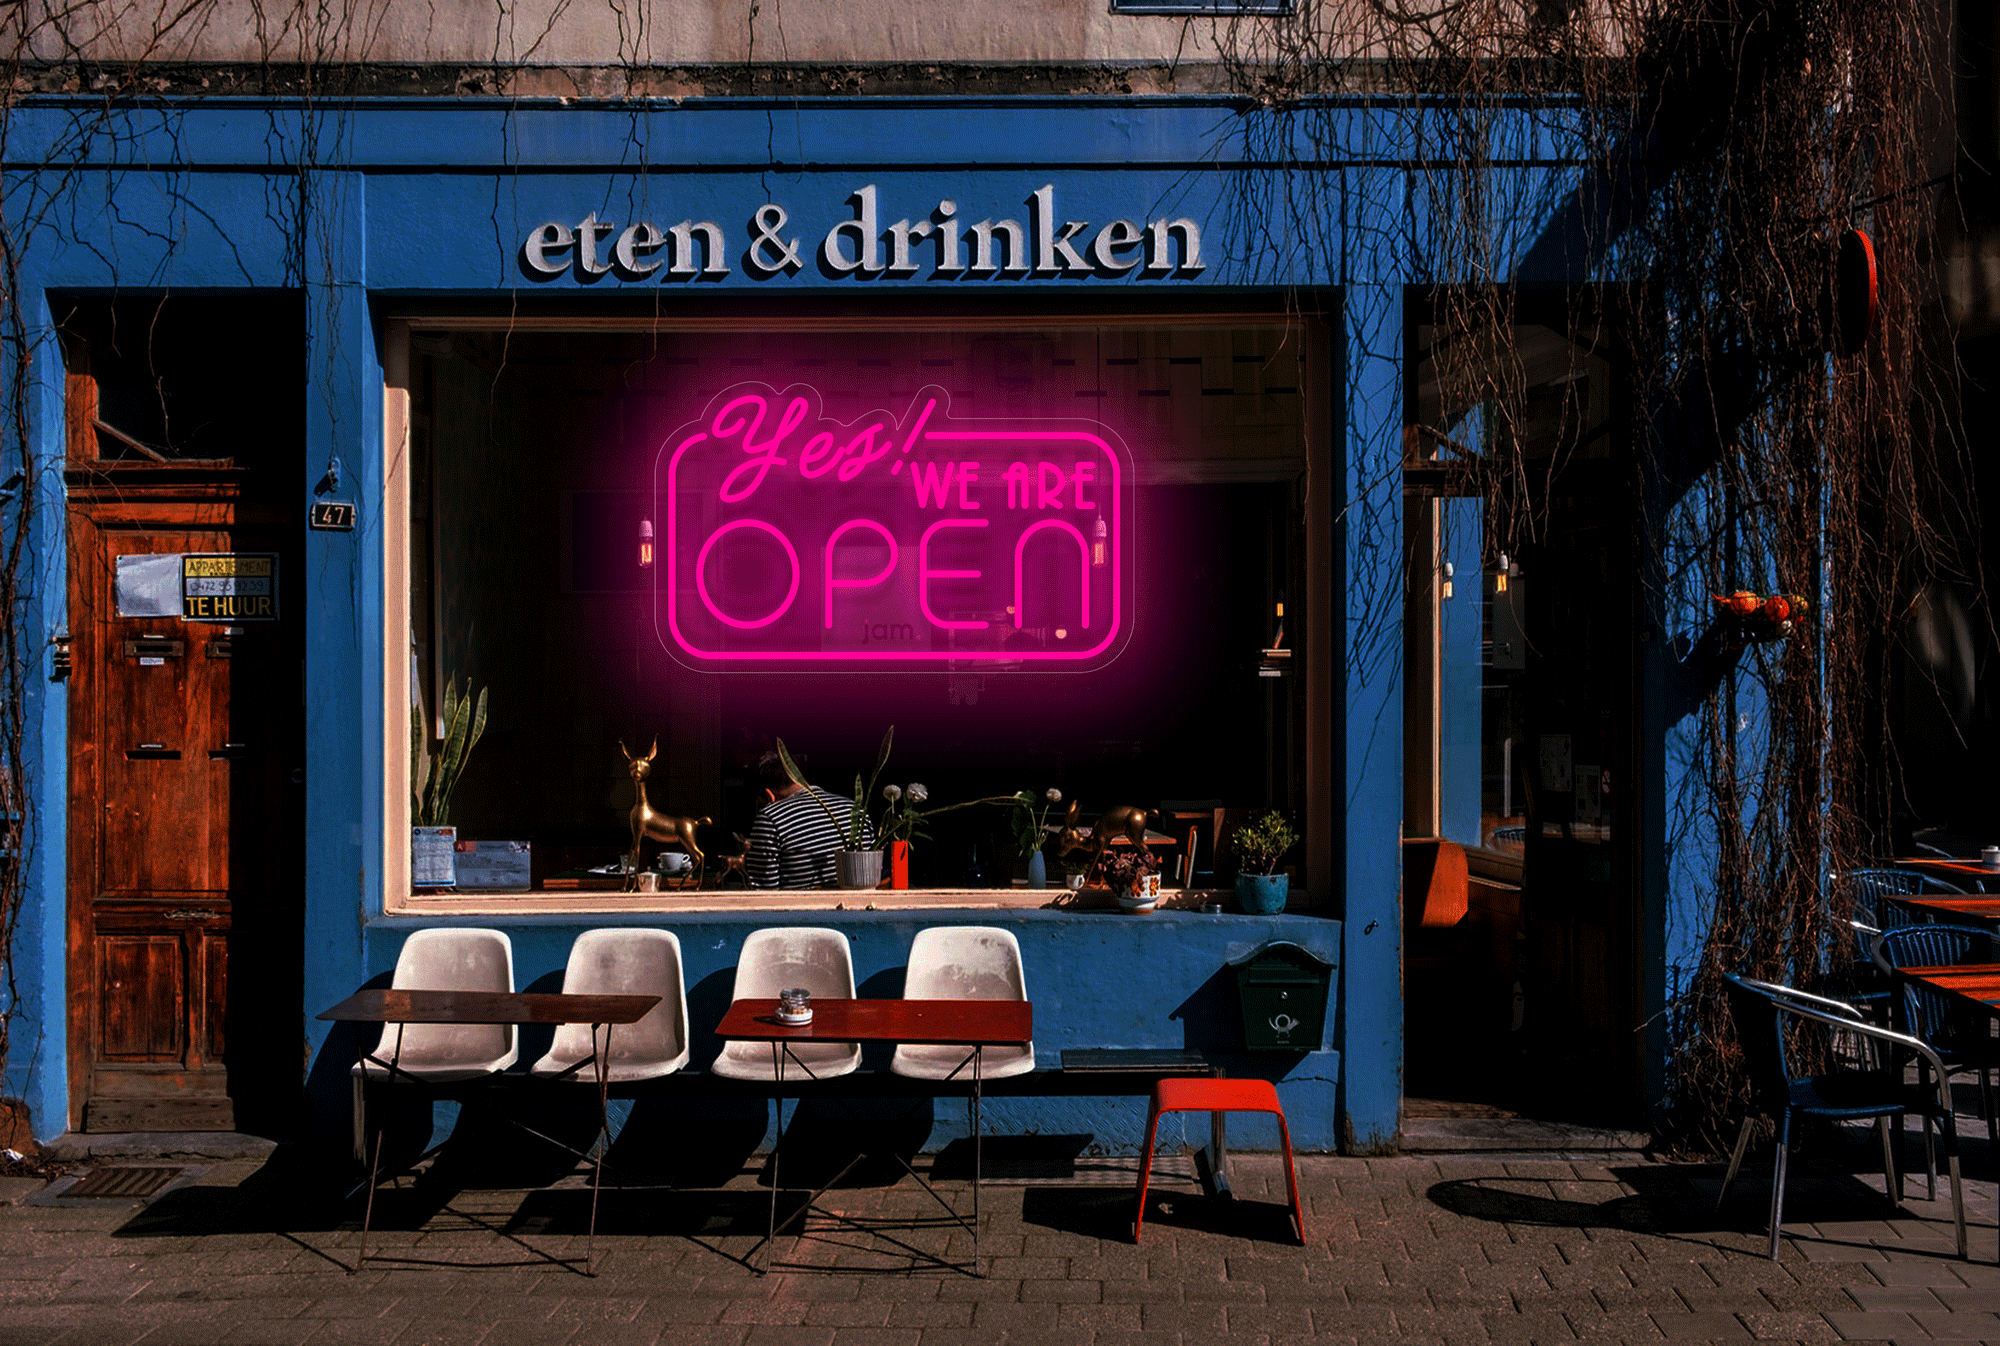 Yes! WE ARE OPEN LED Neon Sign